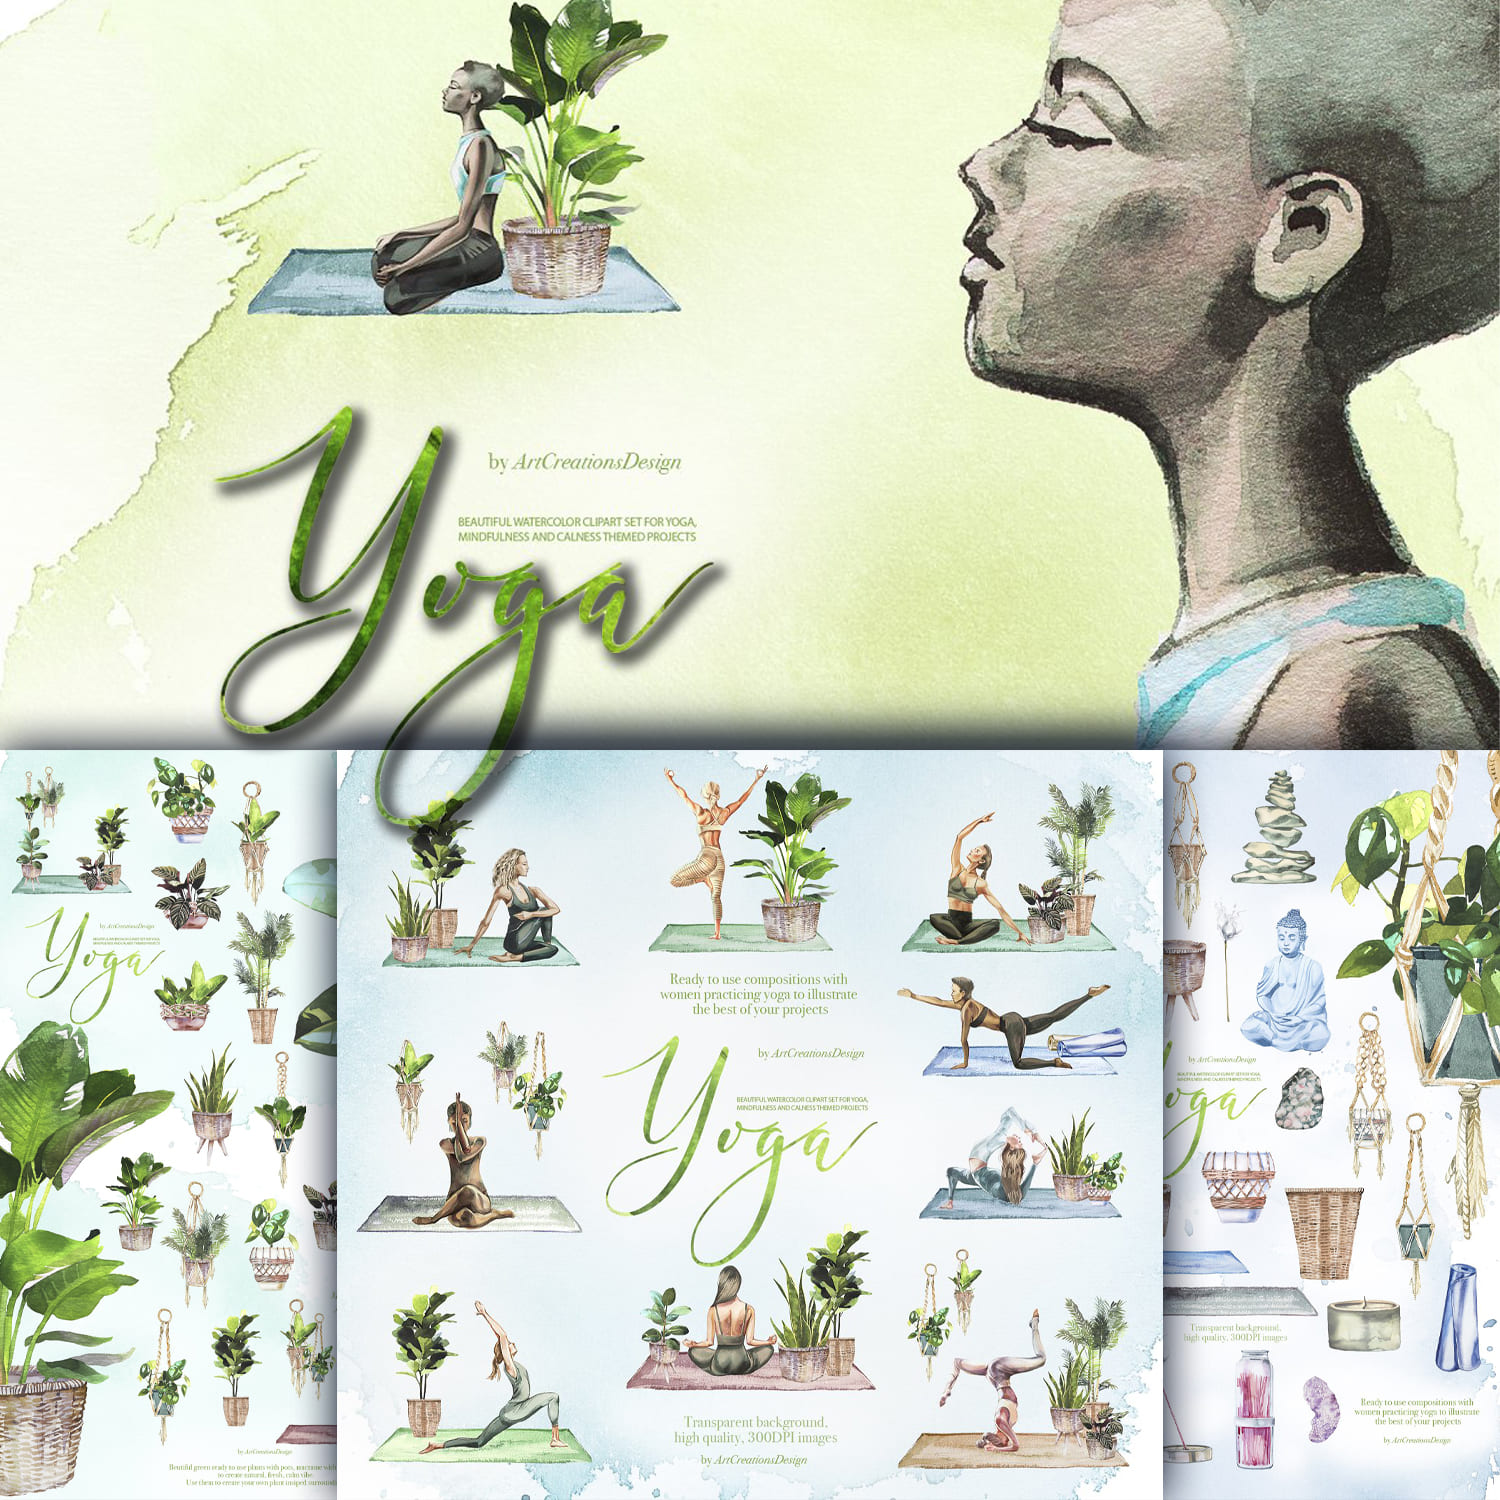 Watercolor Yoga Clipart Set created by ArtCreationsDesign.